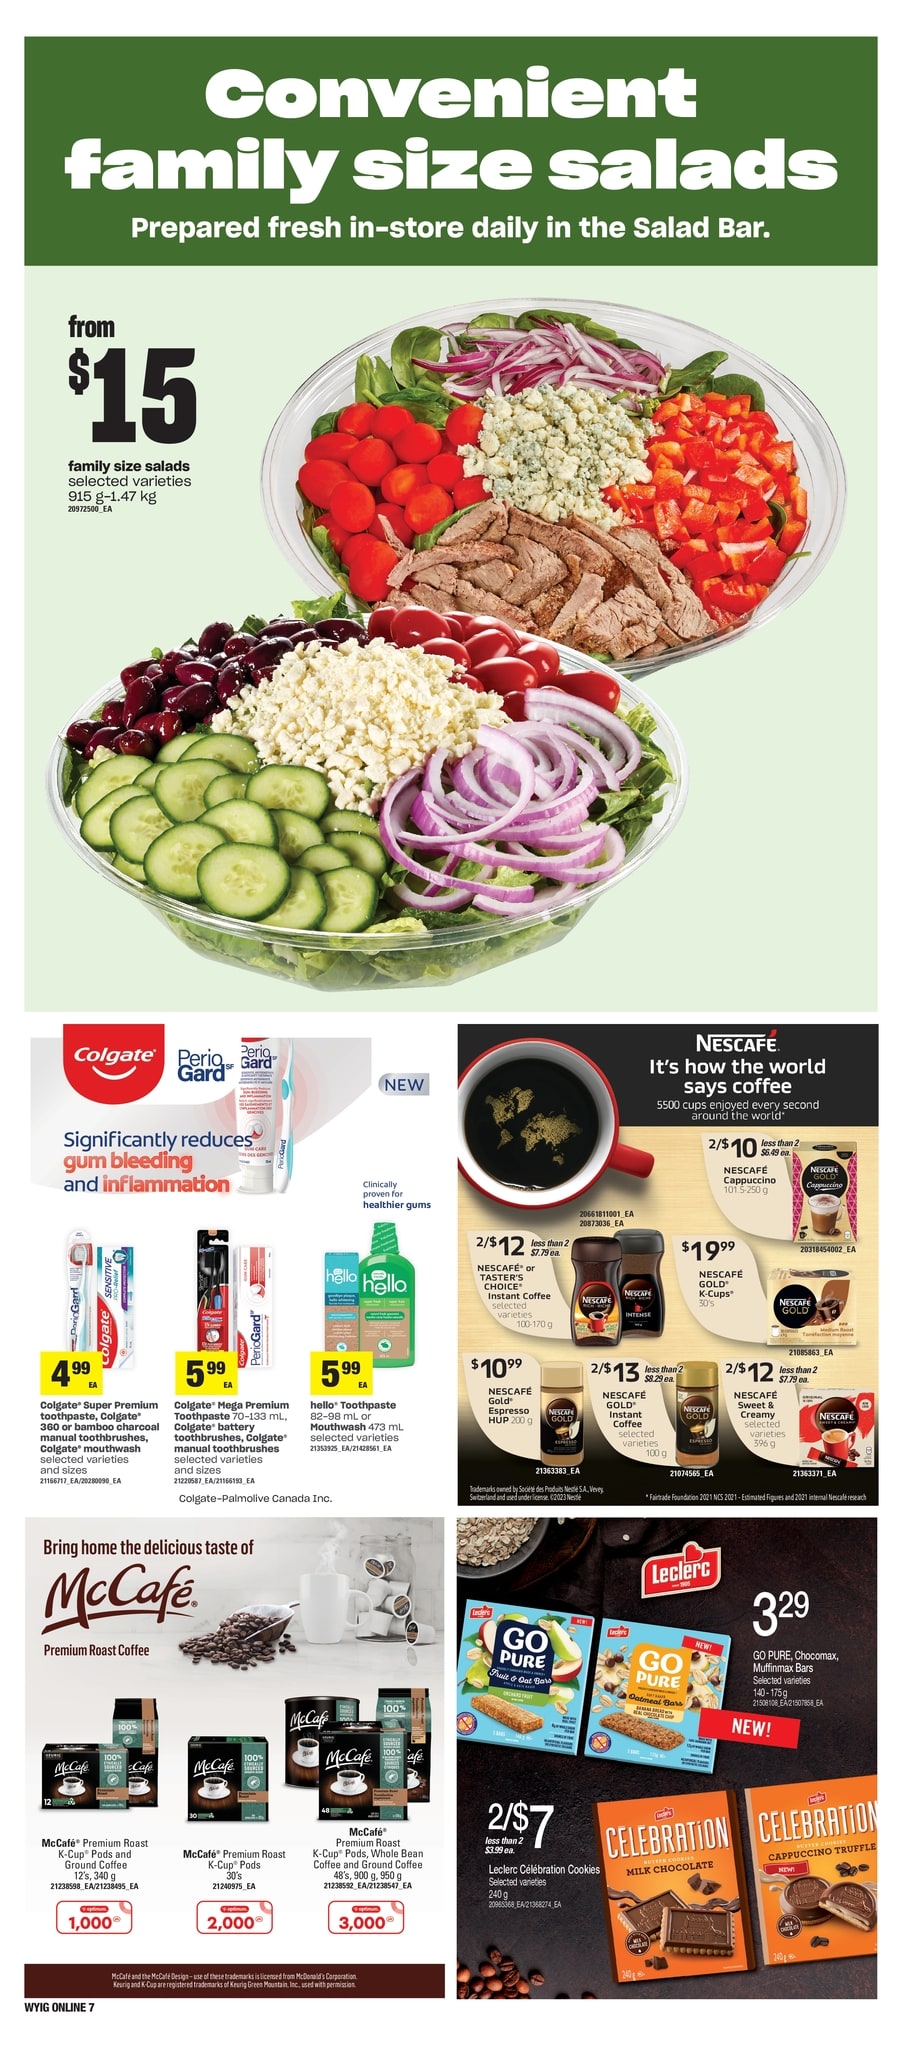 Independent - Western Canada - Weekly Flyer Specials - Page 13